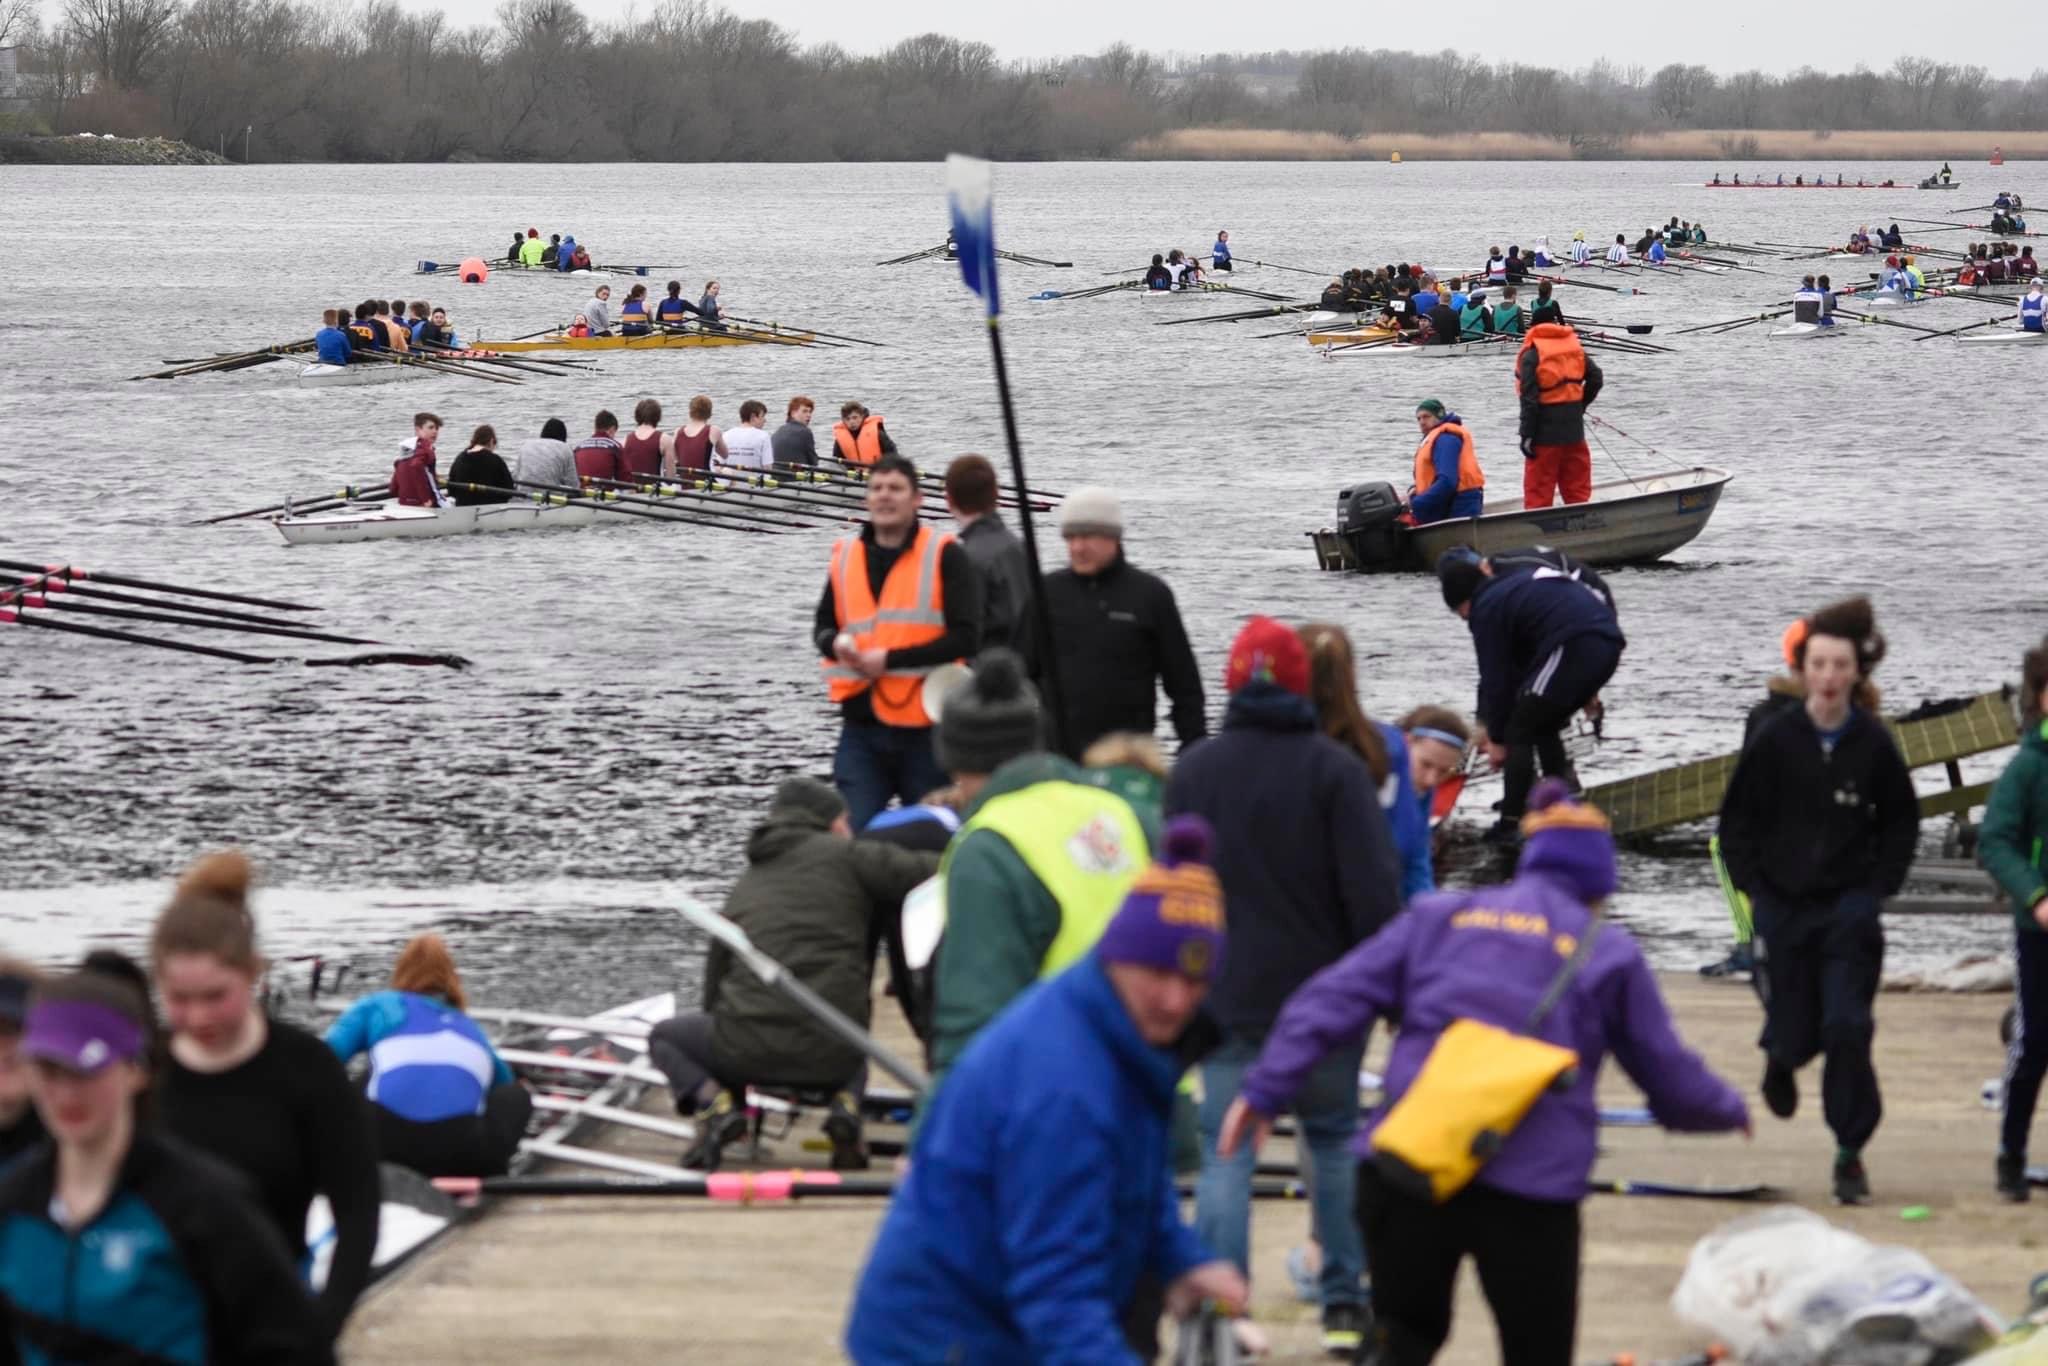 The City Head of the River time trial event returns with St Michael's Rowing Club hosting the event for the 3rd time this Saturday, March 18 